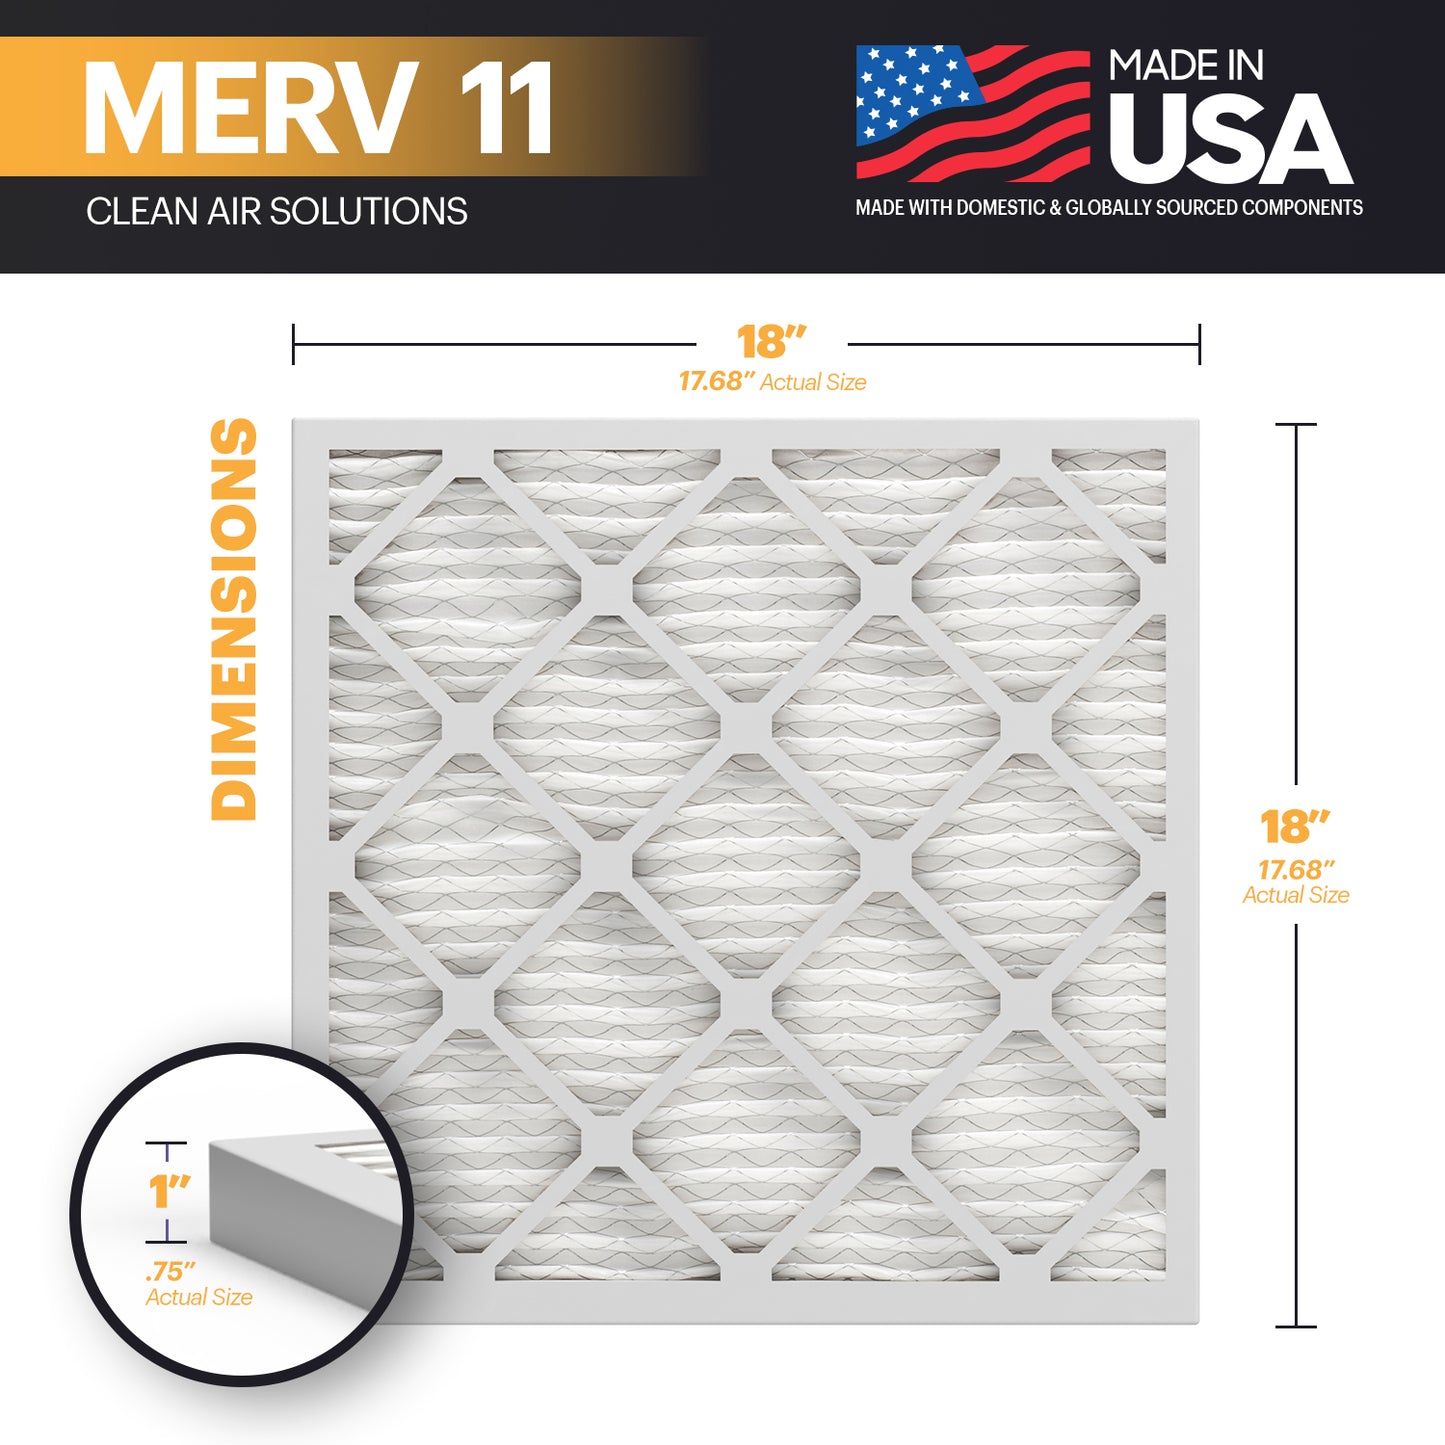 BNX TruFilter 18x18x1 MERV 11 Pleated Air Filter – Made in USA (6-Pack)